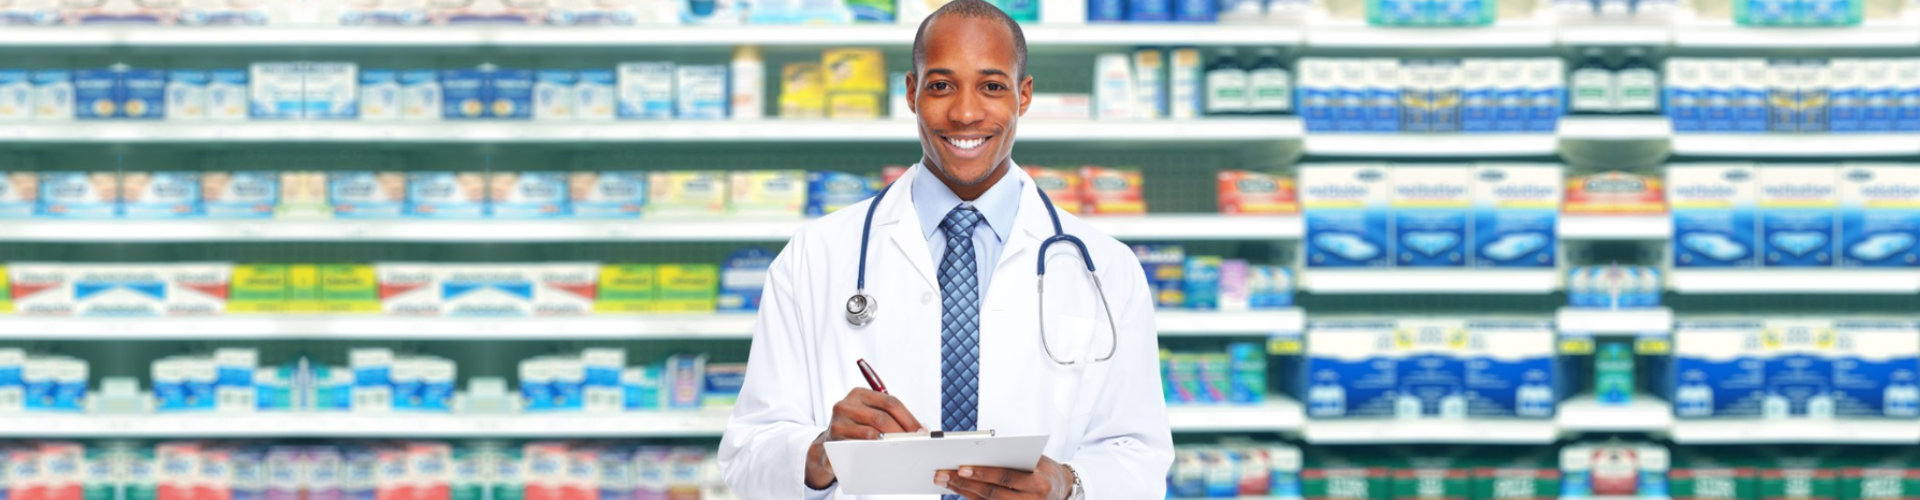 pharmacist on the counter